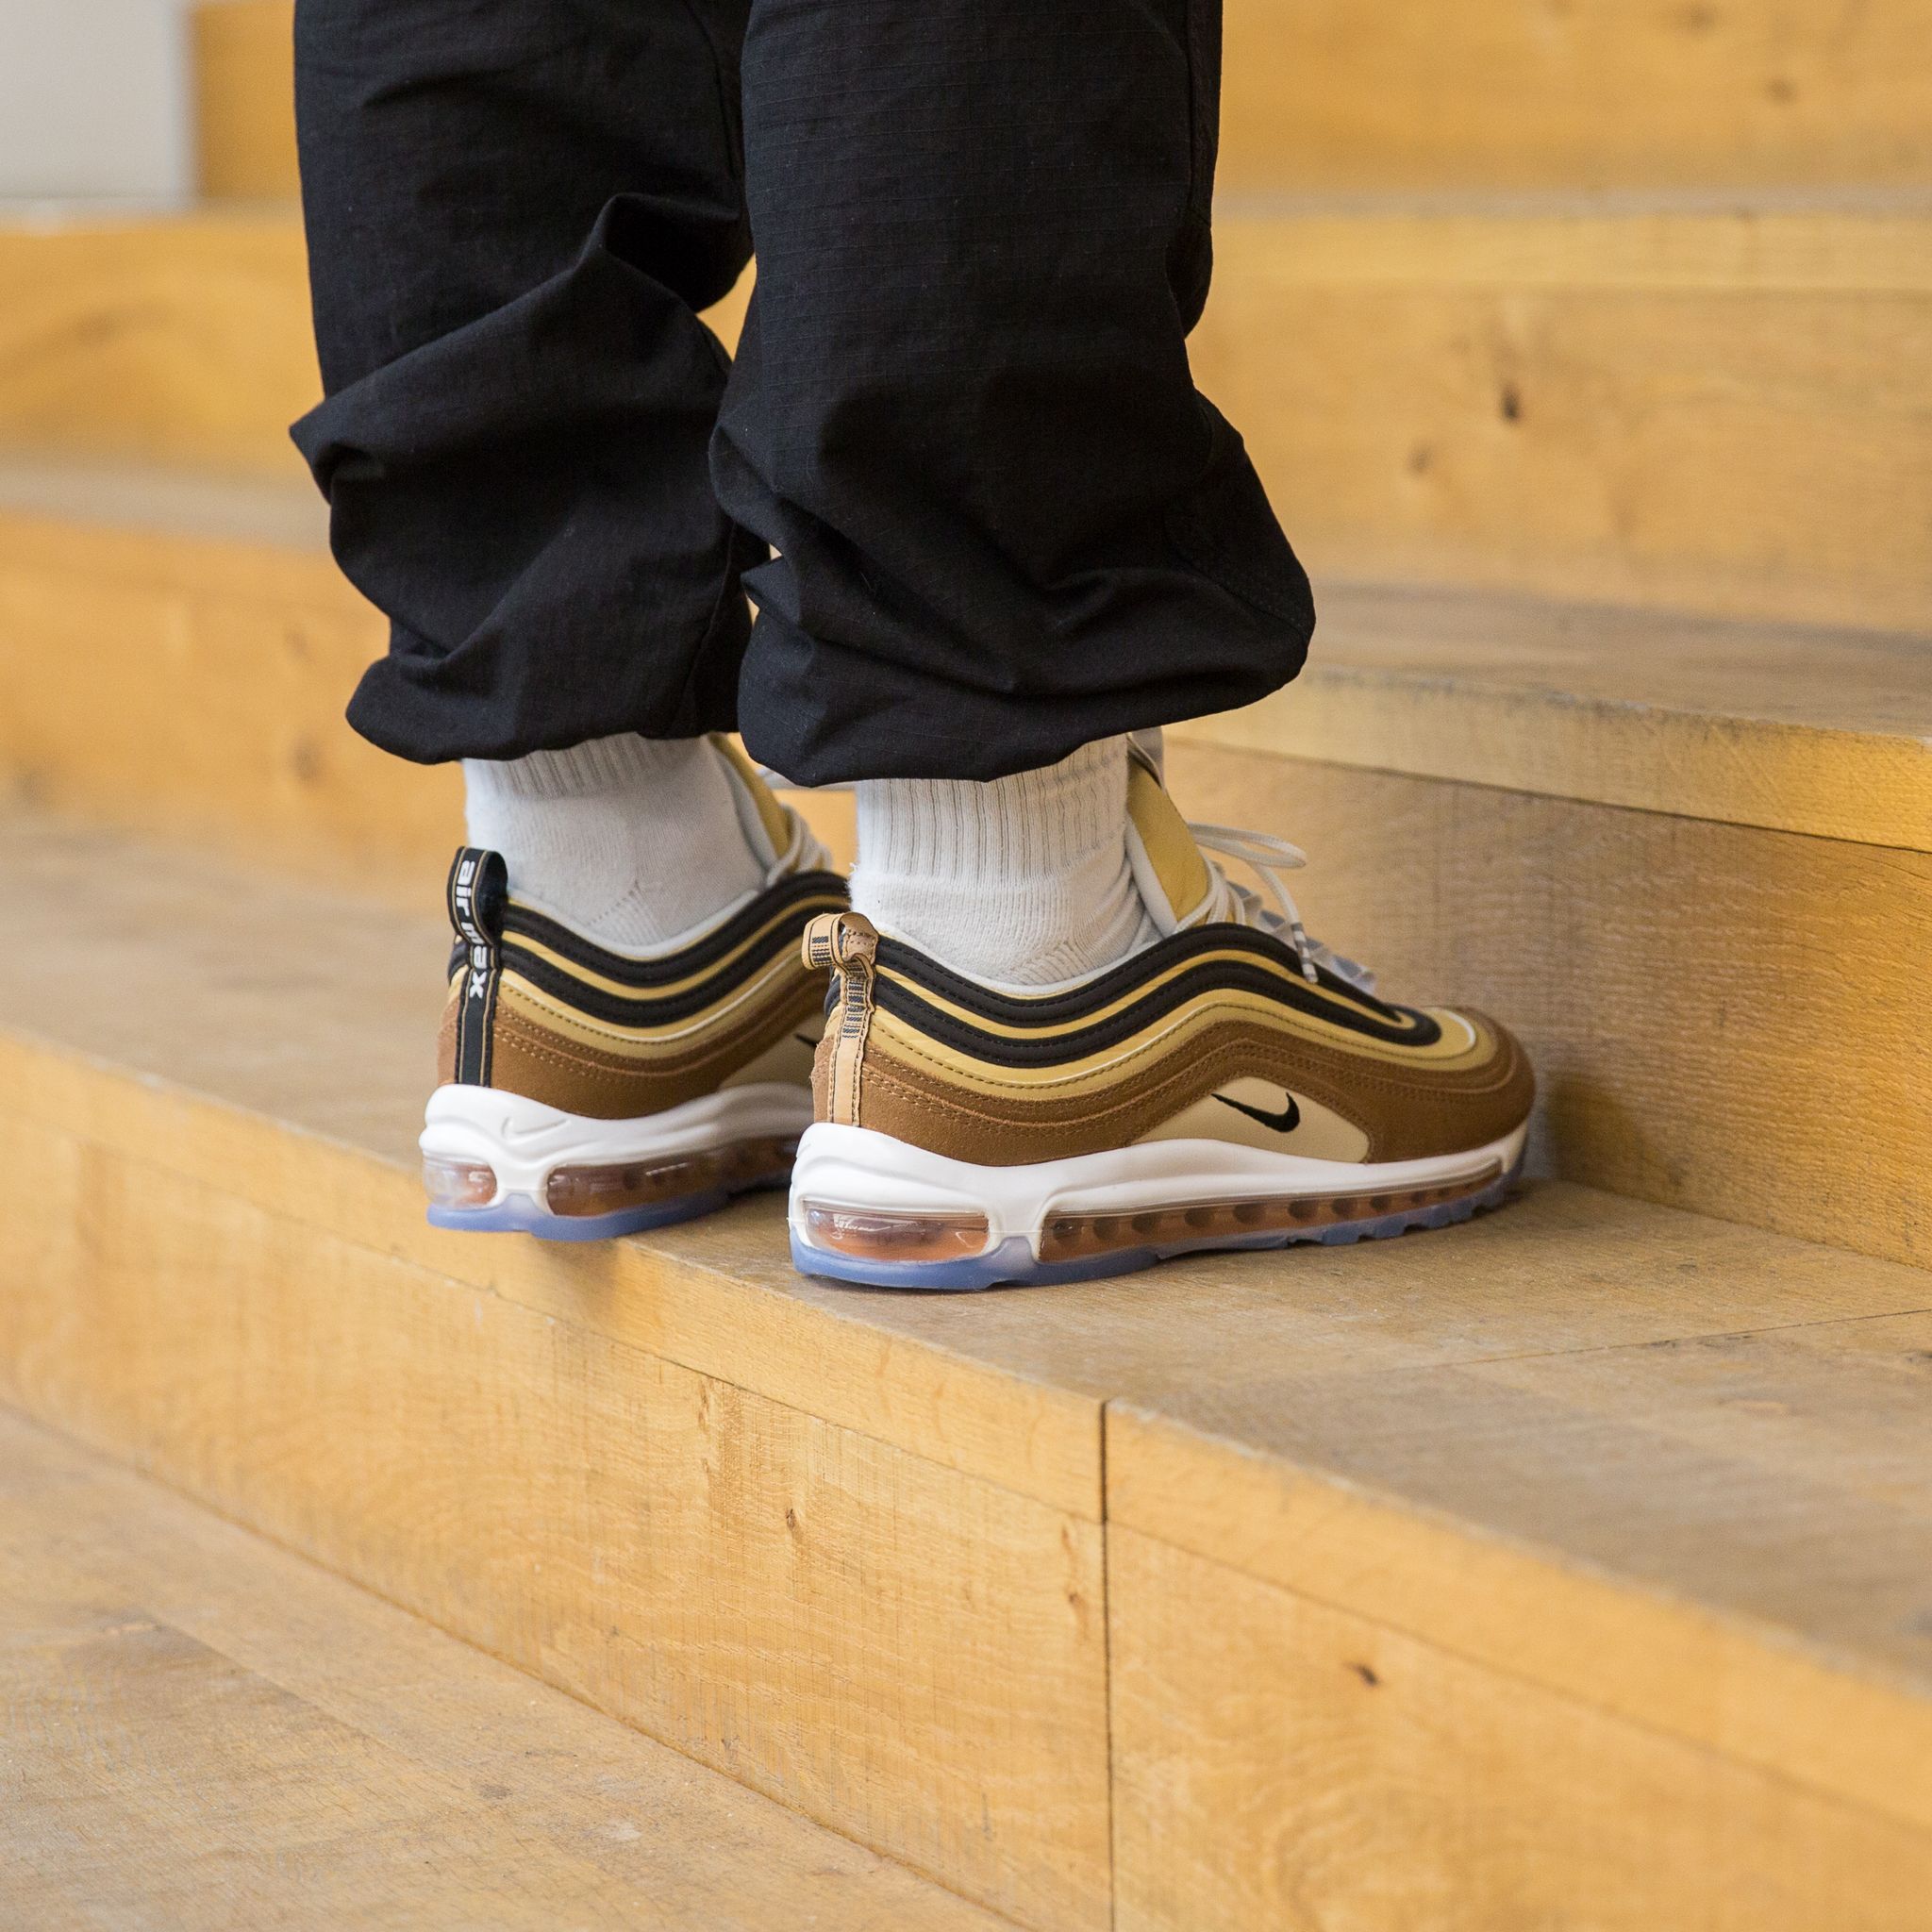 Titolo on Twitter: "NEW IN Nike Air Max 97 "Shipping Box" - Brown/Black-Elemental Gold SHOP HERE : https://t.co/wWGMnmcIHo https://t.co/6OK95p8vln" / Twitter